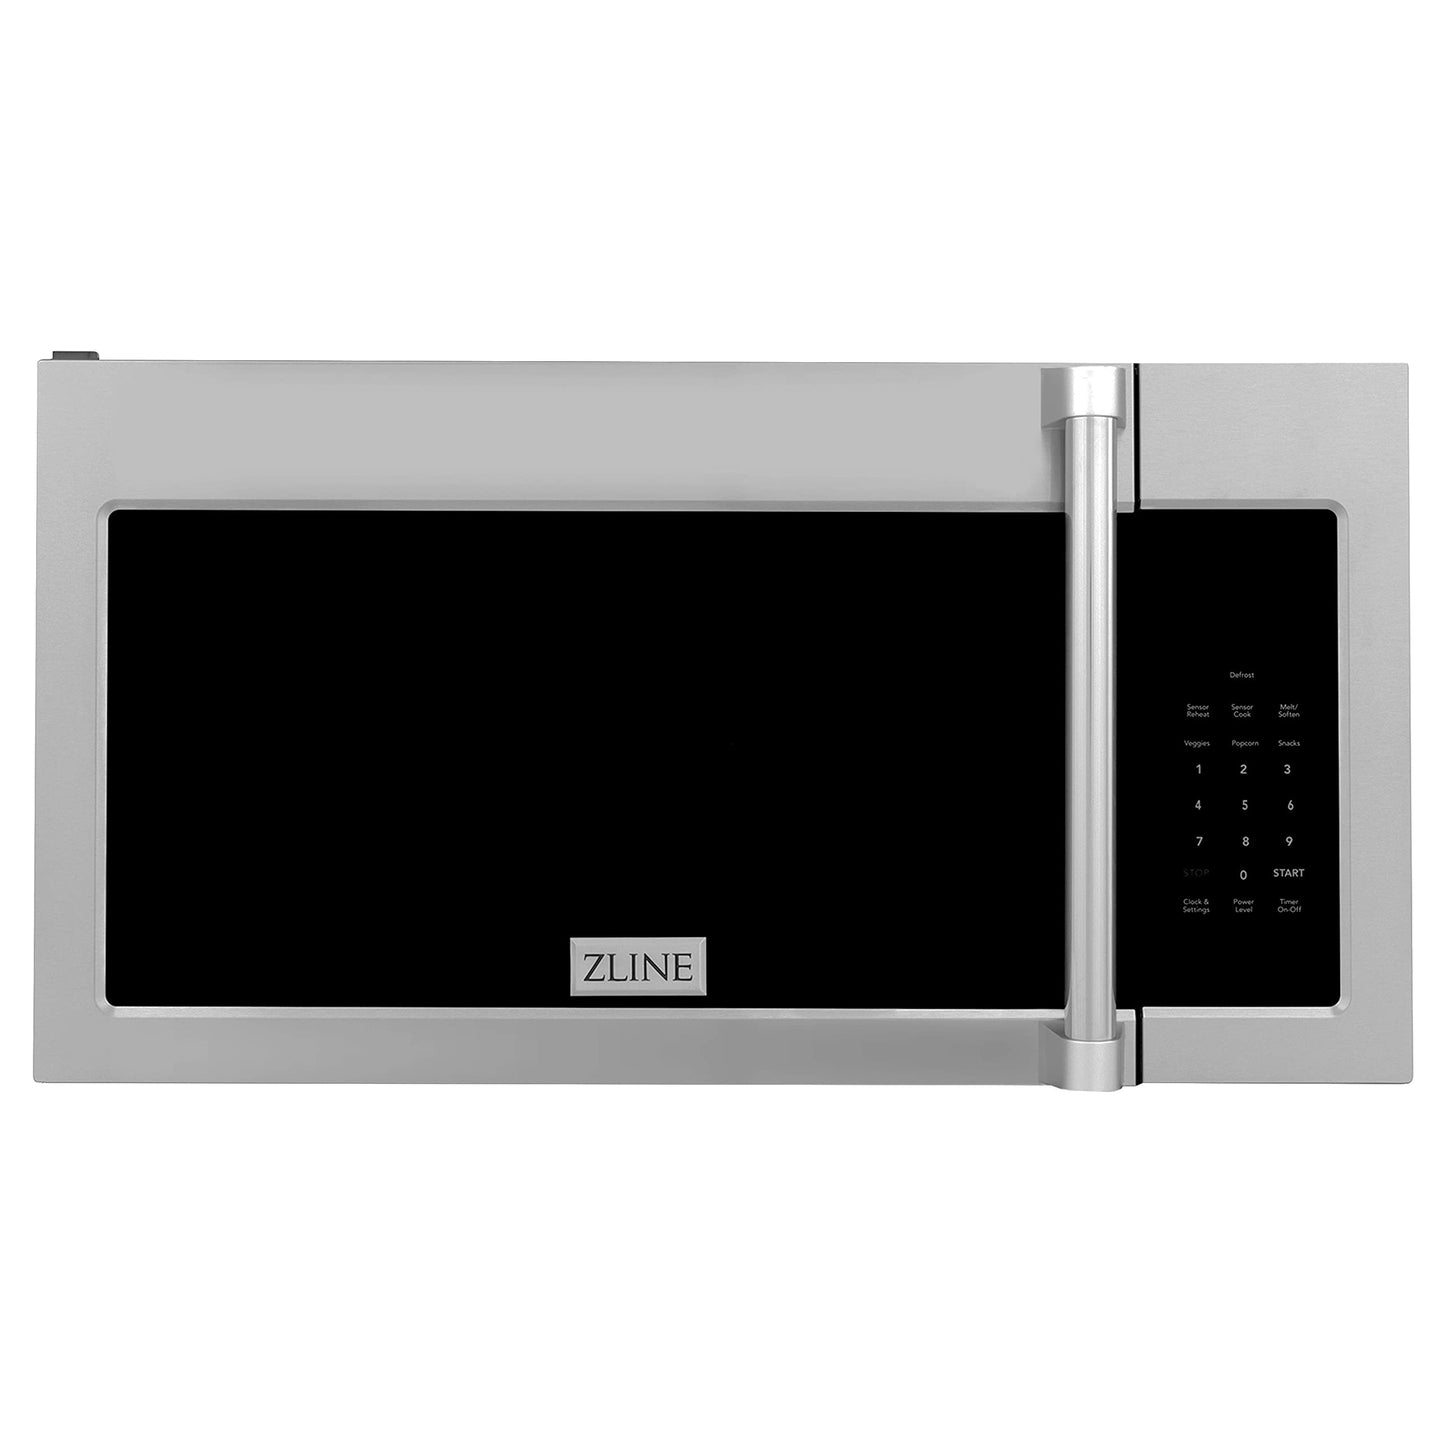 30" 1.5 Cu. Ft. Over The Range Microwave In Stainless Steel With Set Of 2 Charcoal Filters Silver Finish Ul Listed